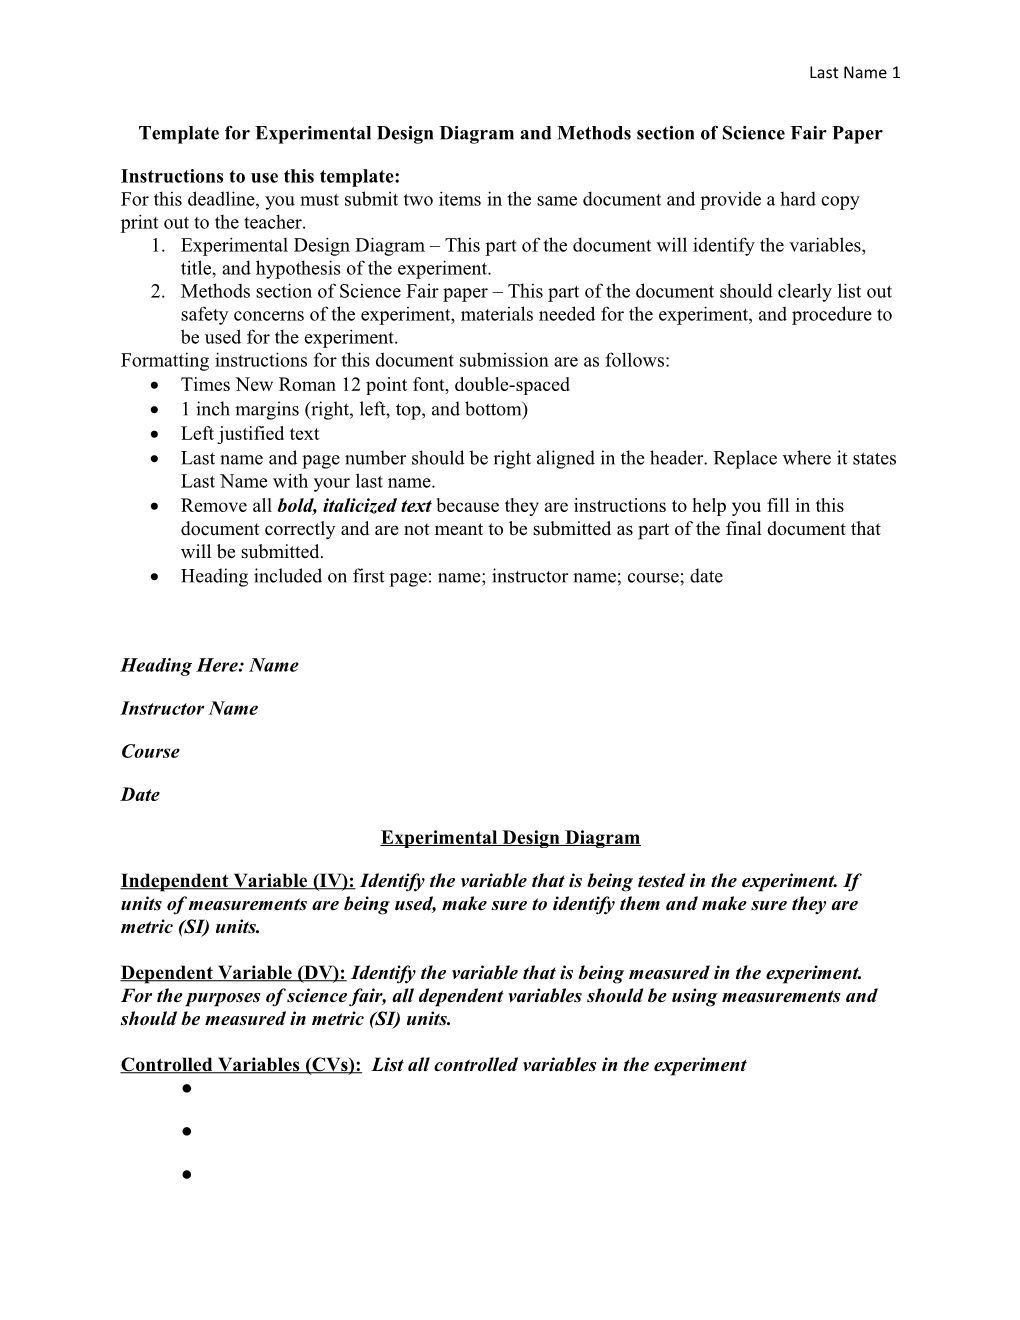 Template for Experimental Design Diagram and Methods Section of Science Fair Paper